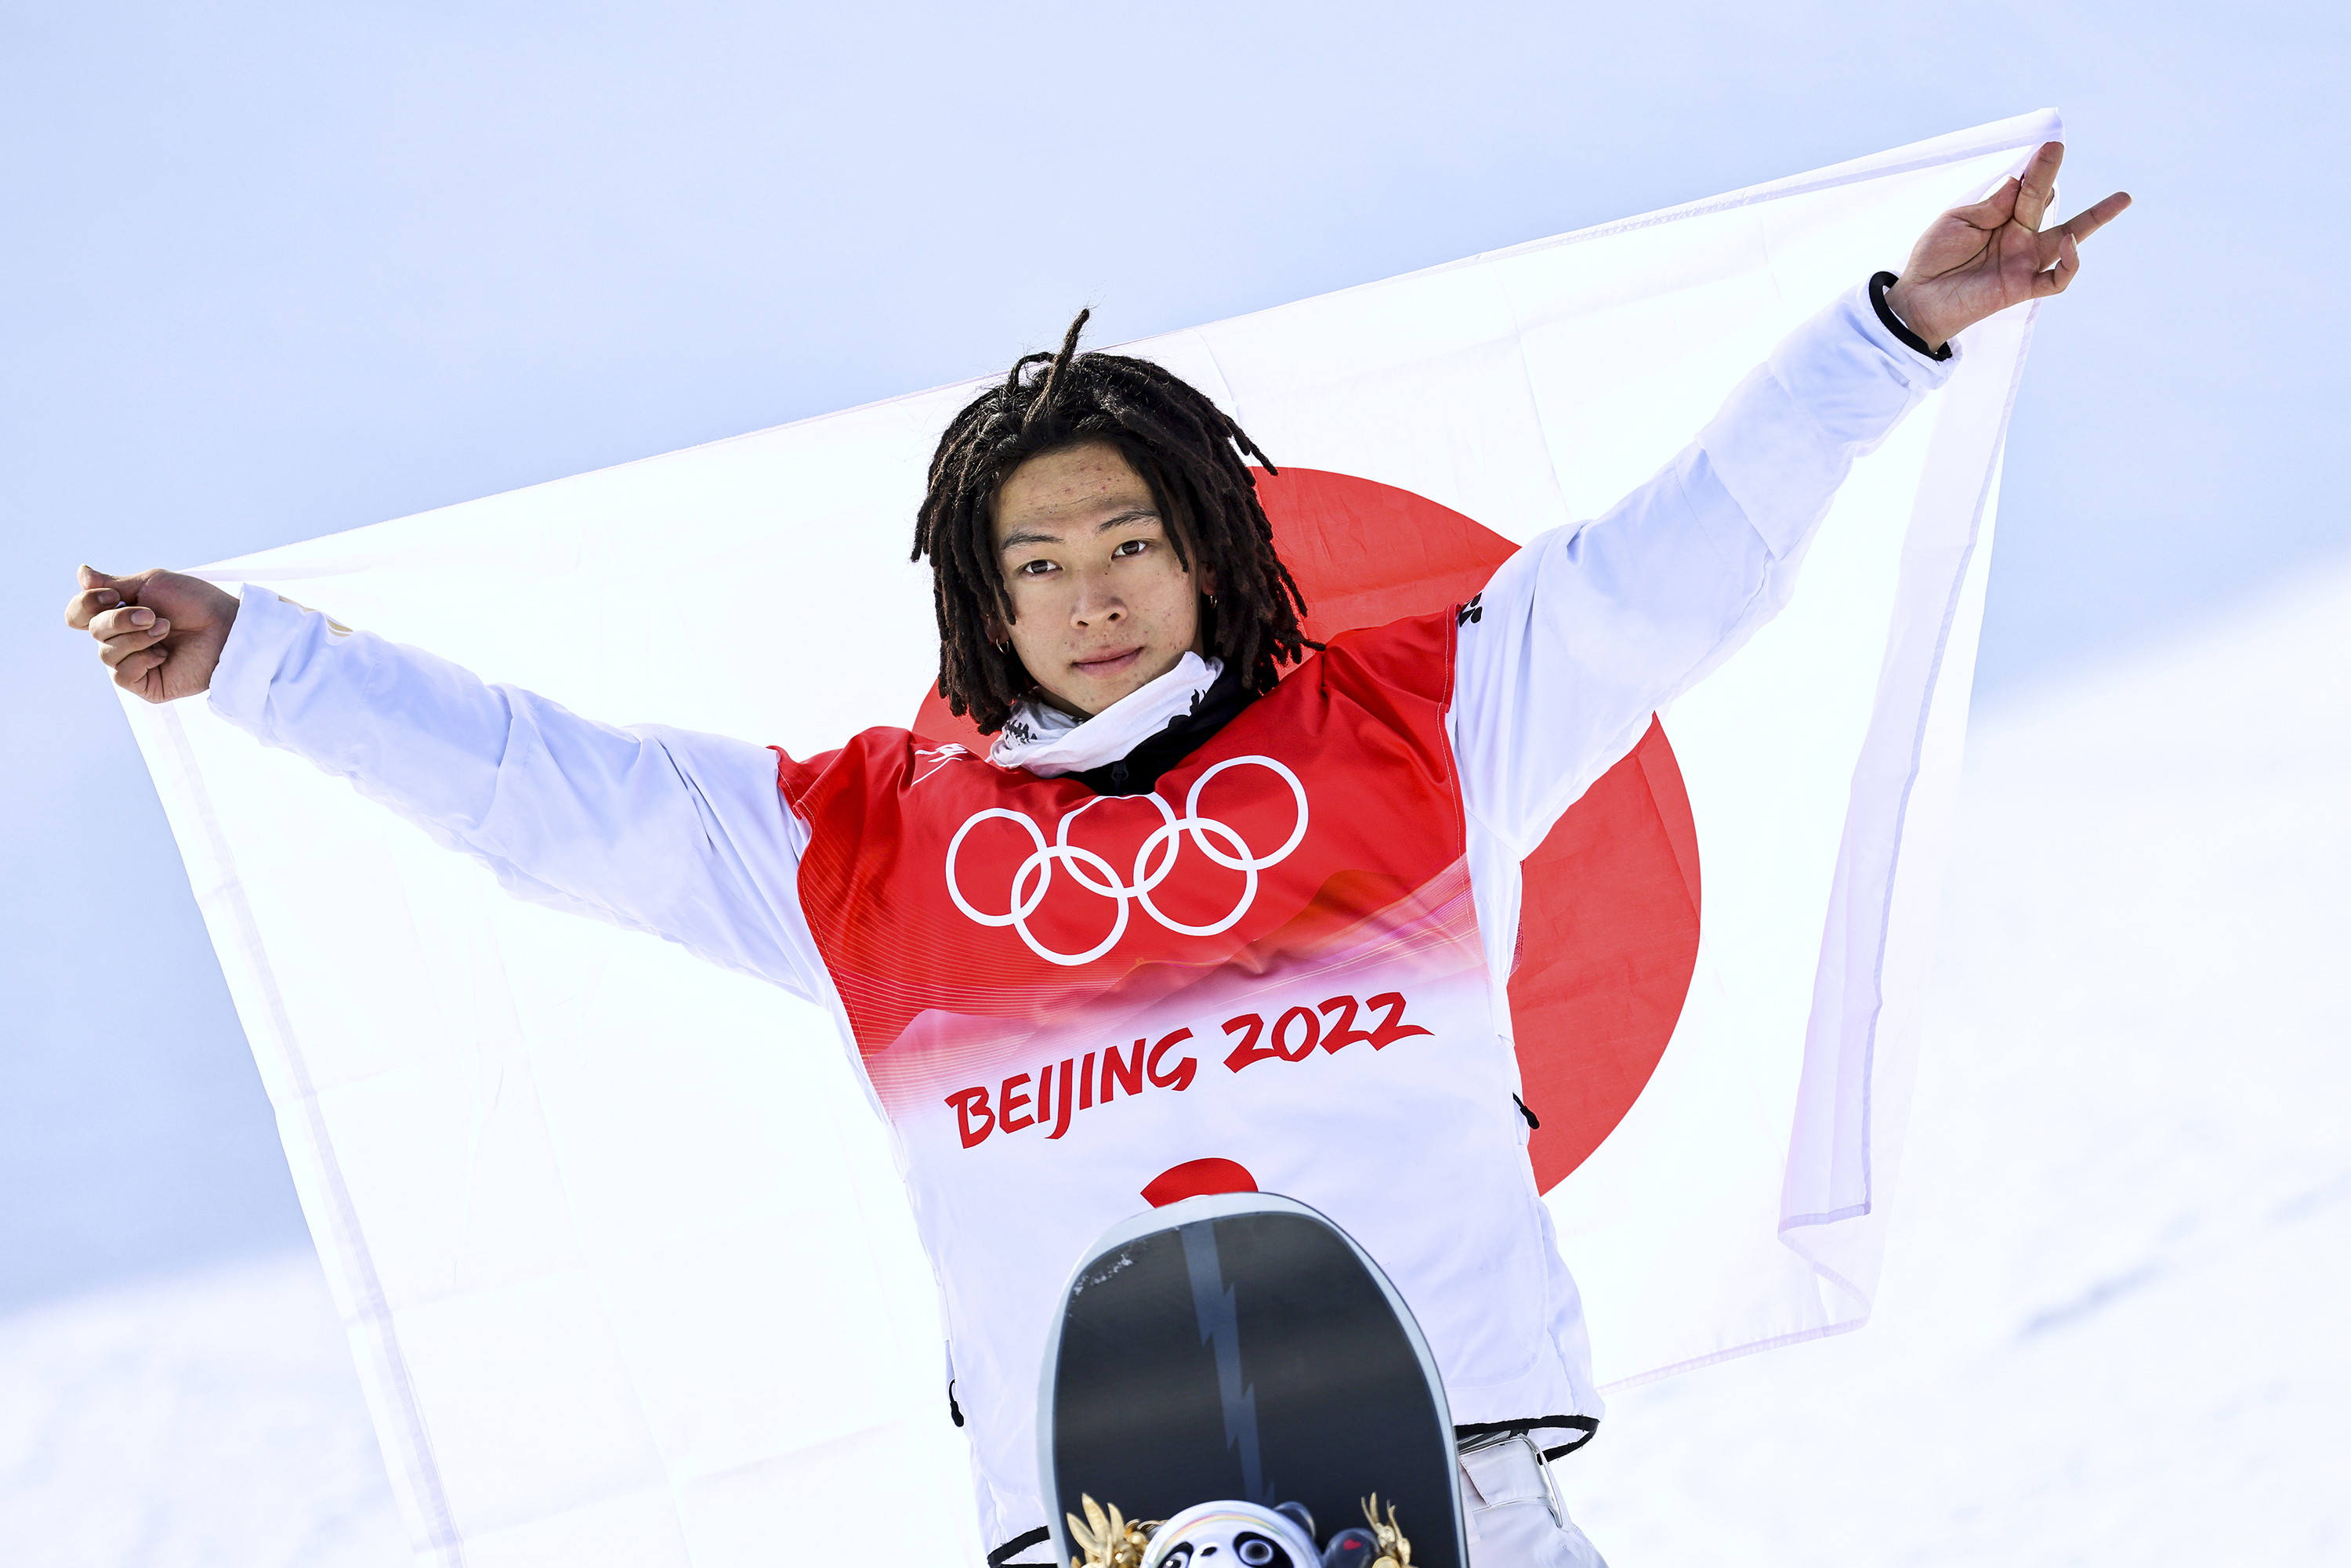 Shaun White Skater Profile, News, Photos, Videos, Coverage, and More at SPoT